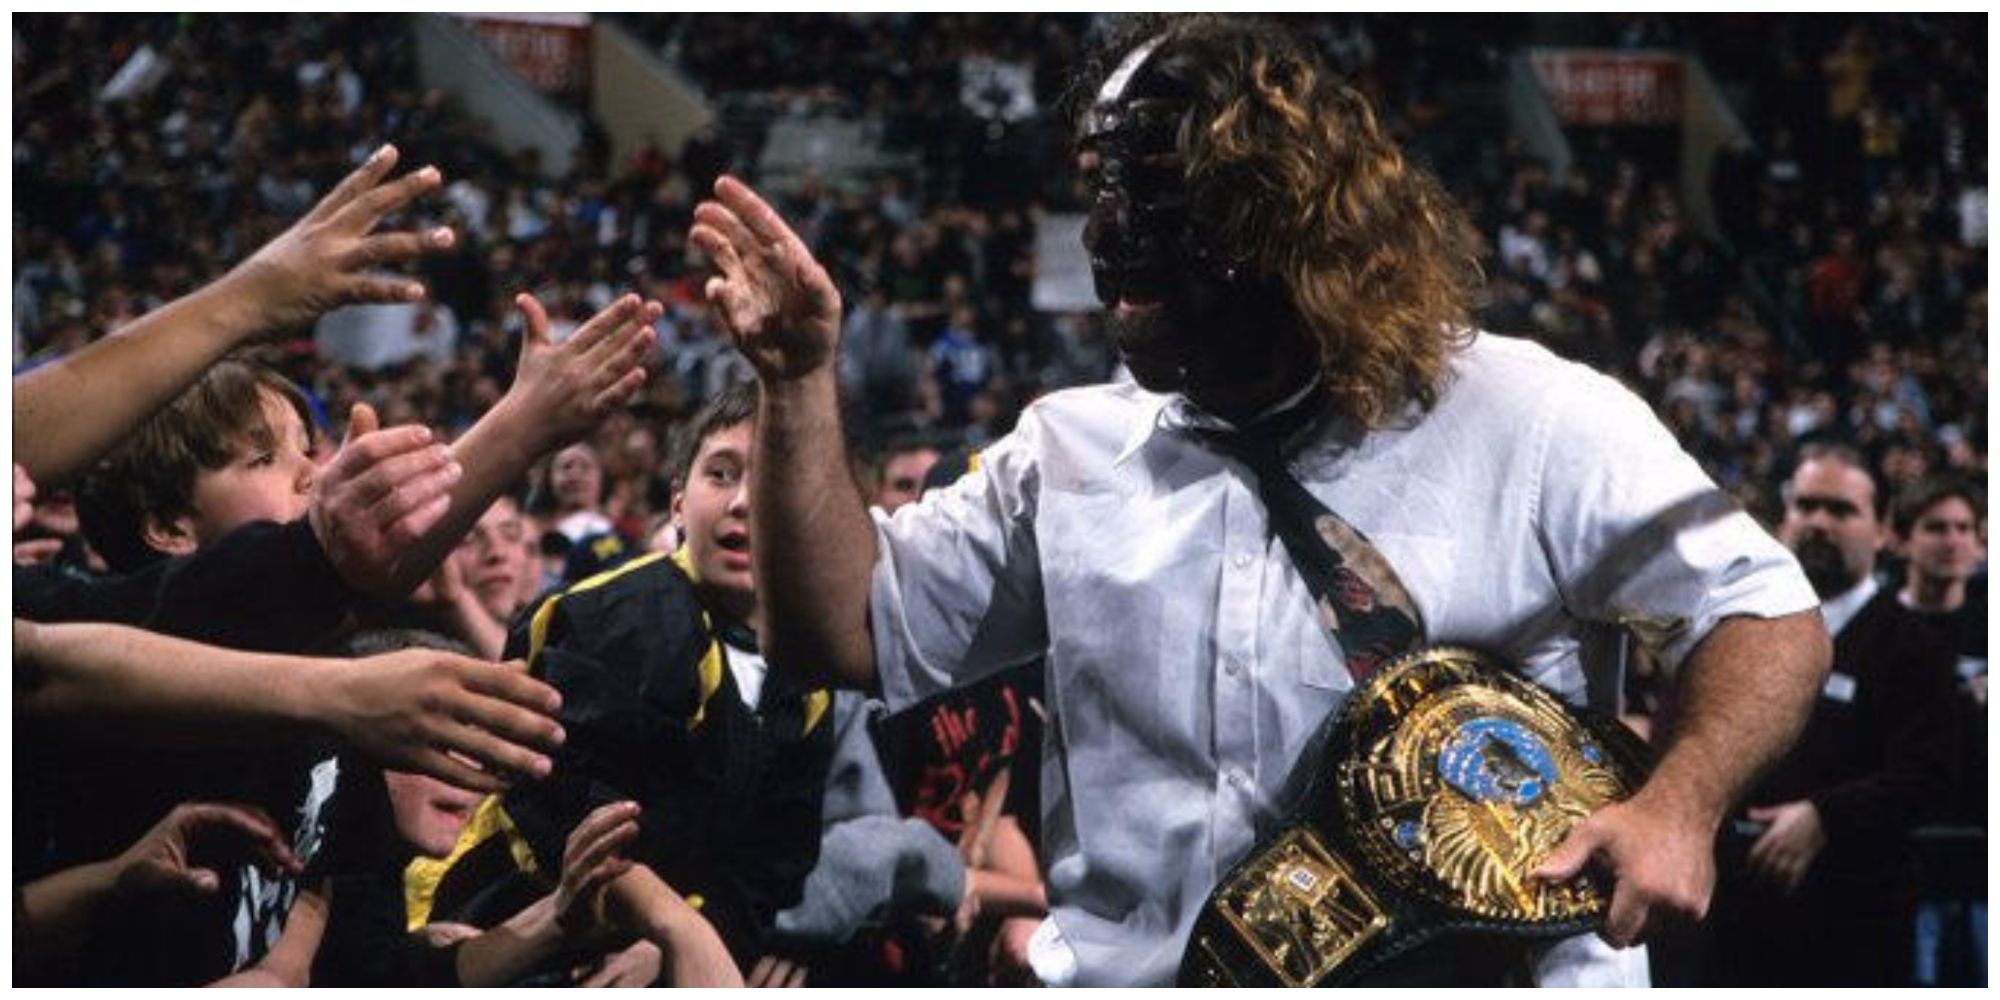 Mankind holding the WWE Championship high-fiving members of the crowd